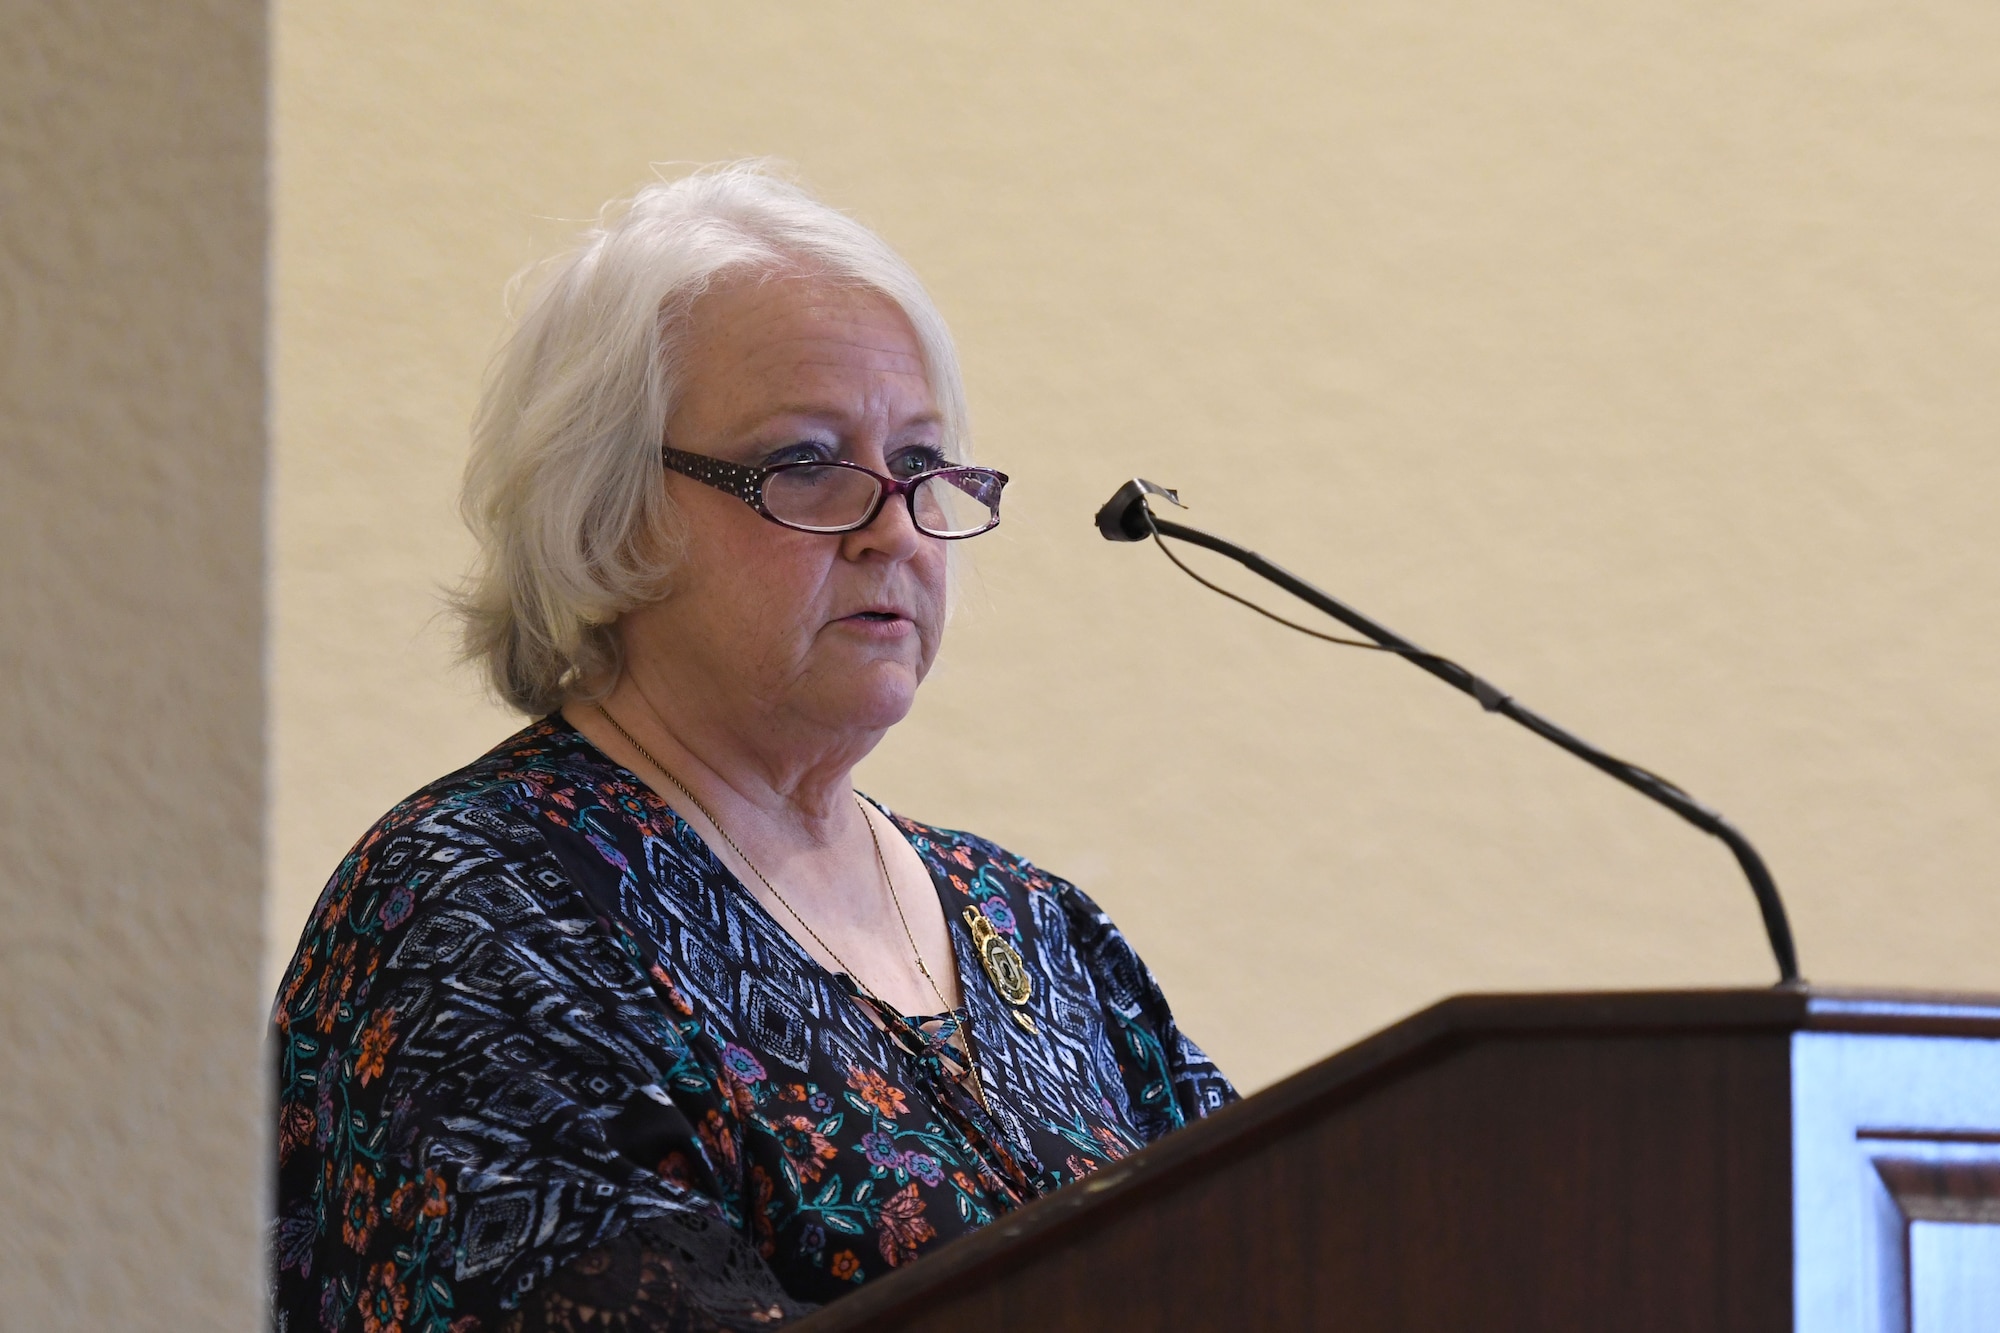 Diane Moore, daughter of U.S. Air Force Chief Master Sgt. Thomas Moore, POW/MIA Vietnam, delivers remarks during the POW/MIA Remembrance Luncheon at the Bay Breeze Event Center at Keesler Air Force Base, Mississippi, Sept. 21, 2018. The event, hosted by the Air Force Sergeants Association, was held to raise awareness and to pay tribute to all prisoners of war and those military members still missing in action. (U.S. Air Force photo by Kemberly Groue)